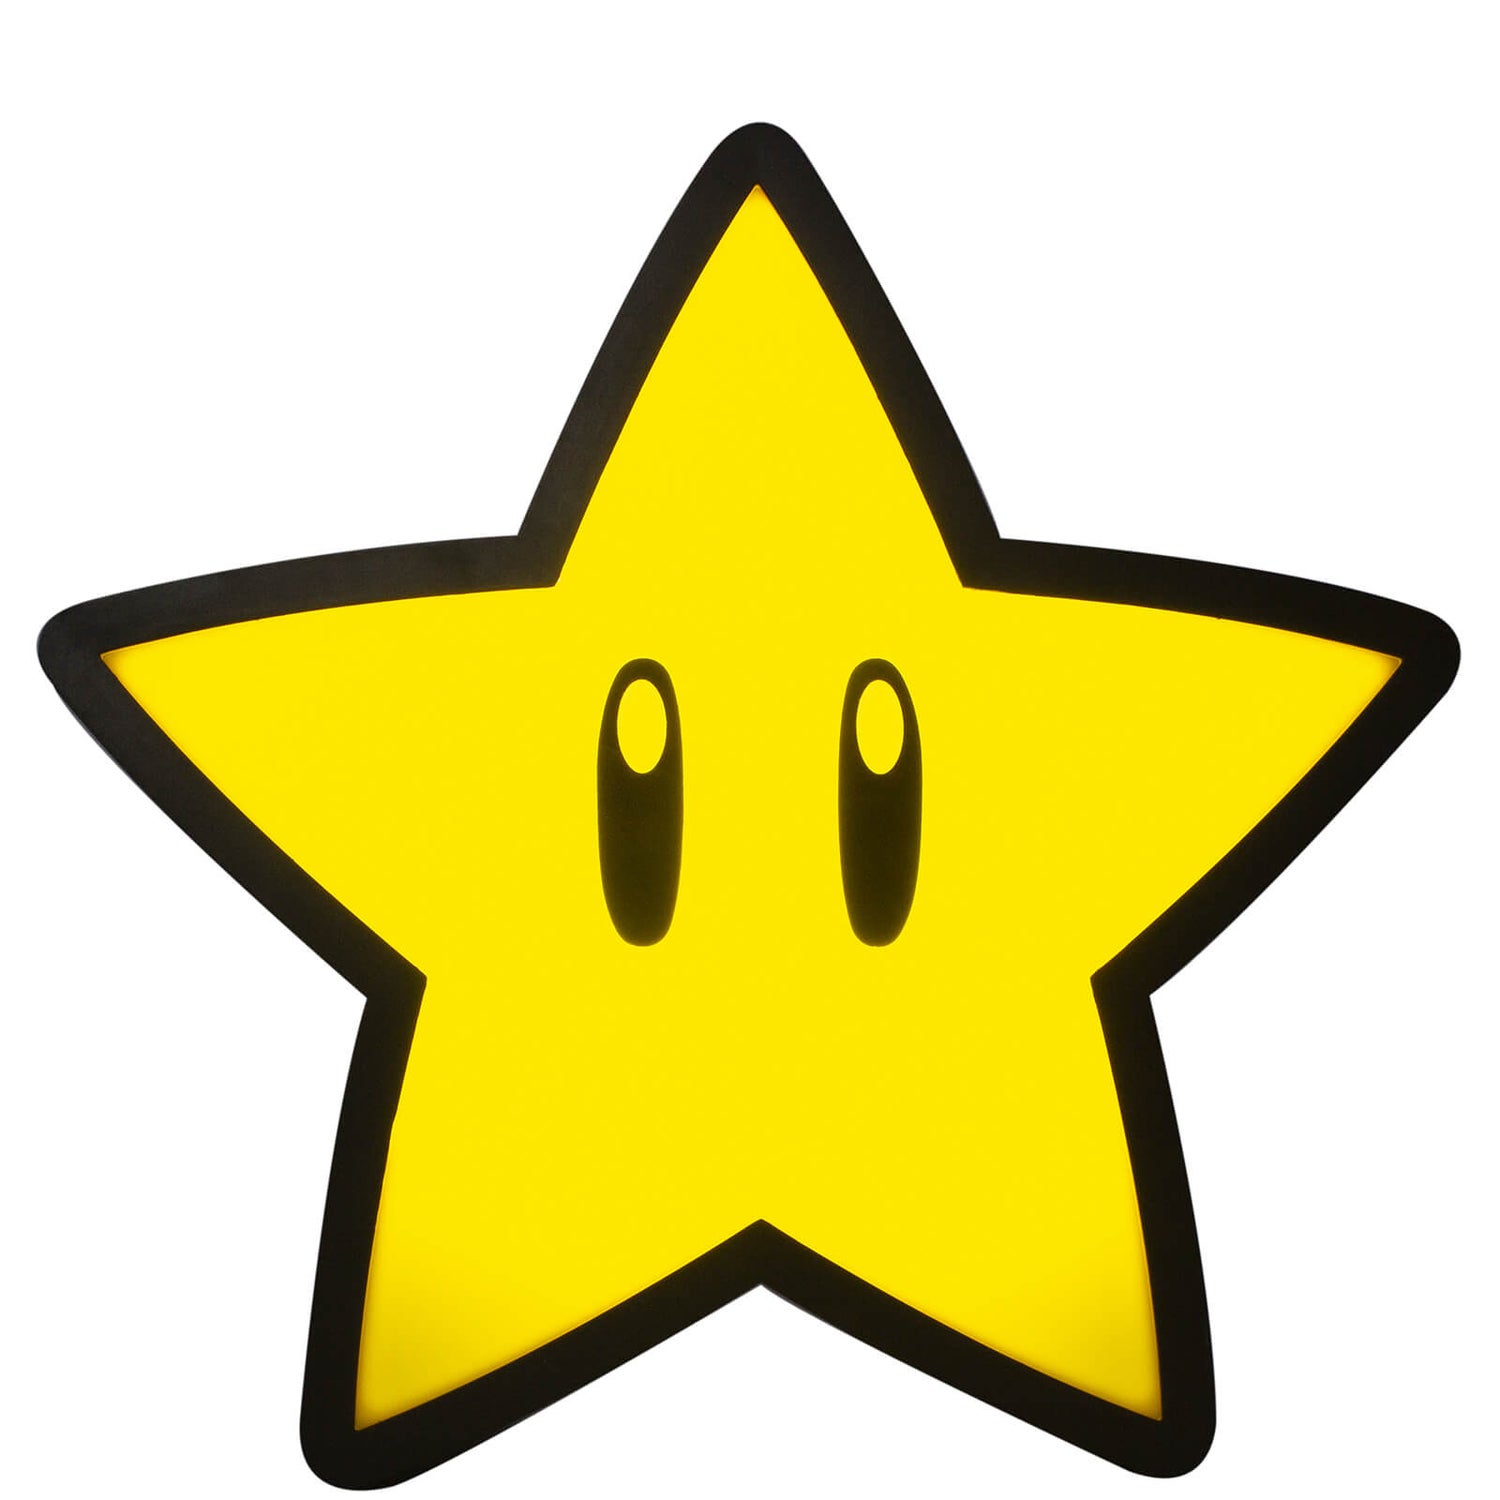 Super Mario Super Star Light with Projection